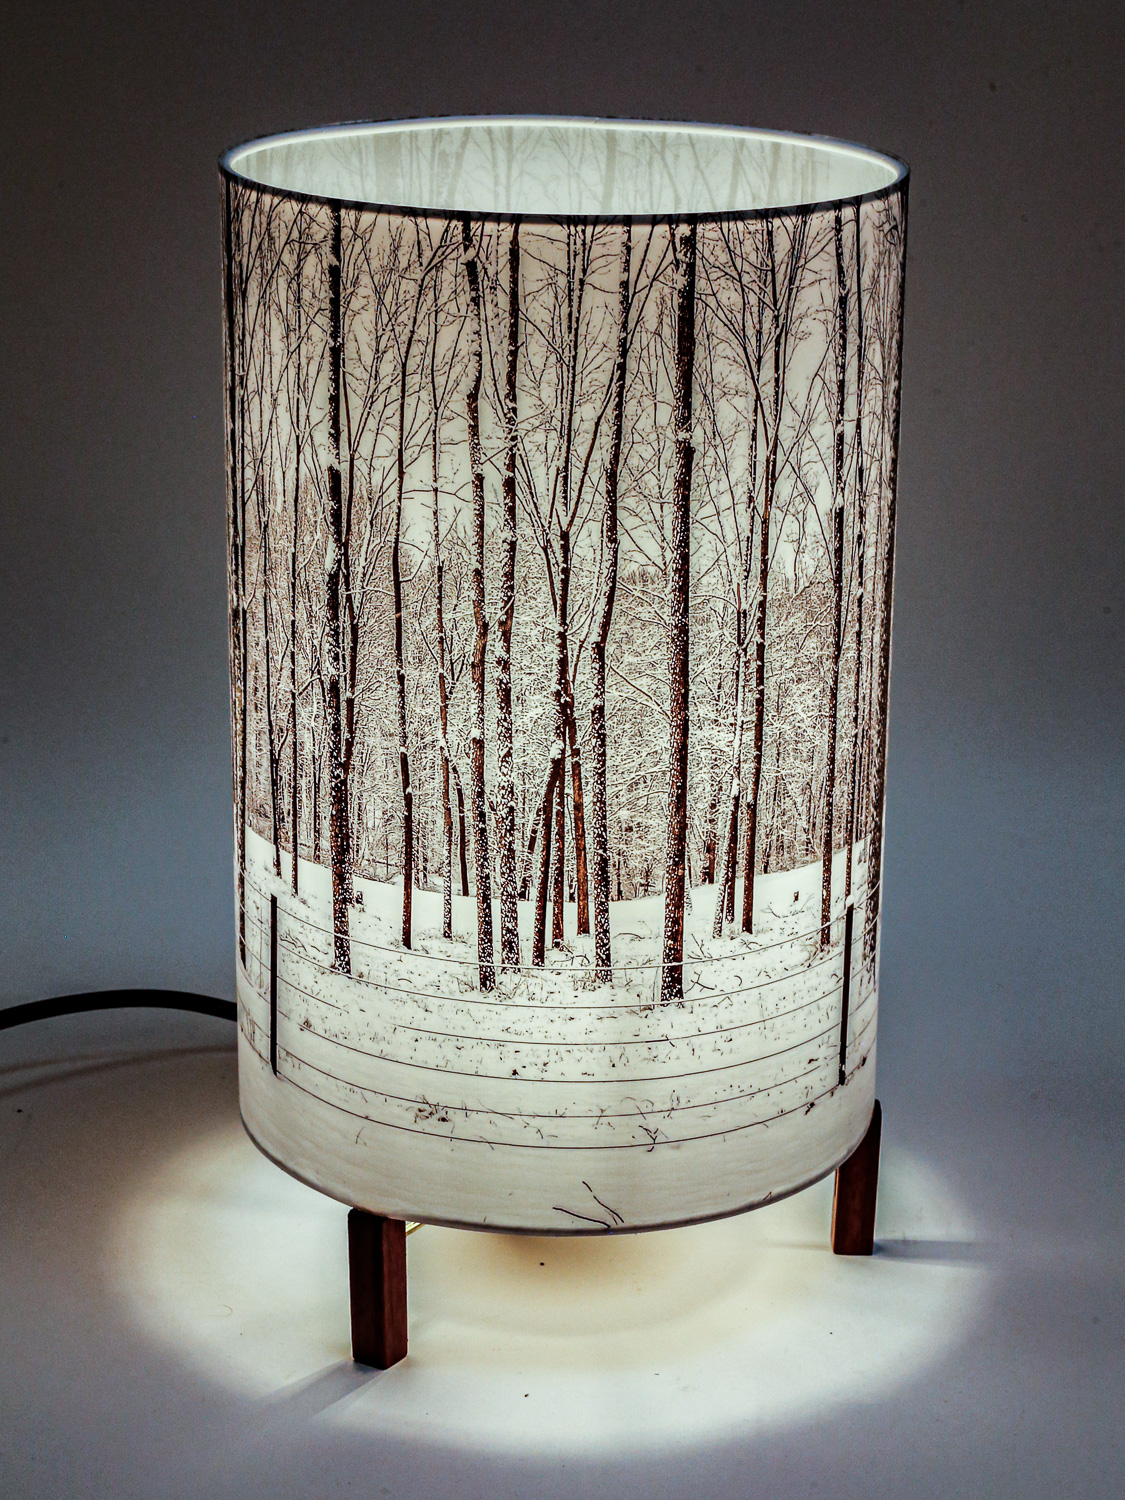 167: Minimalist lamp with photo lampshade with image of walnut trees and snow. -- Photo on Lamp shade by David Elmore